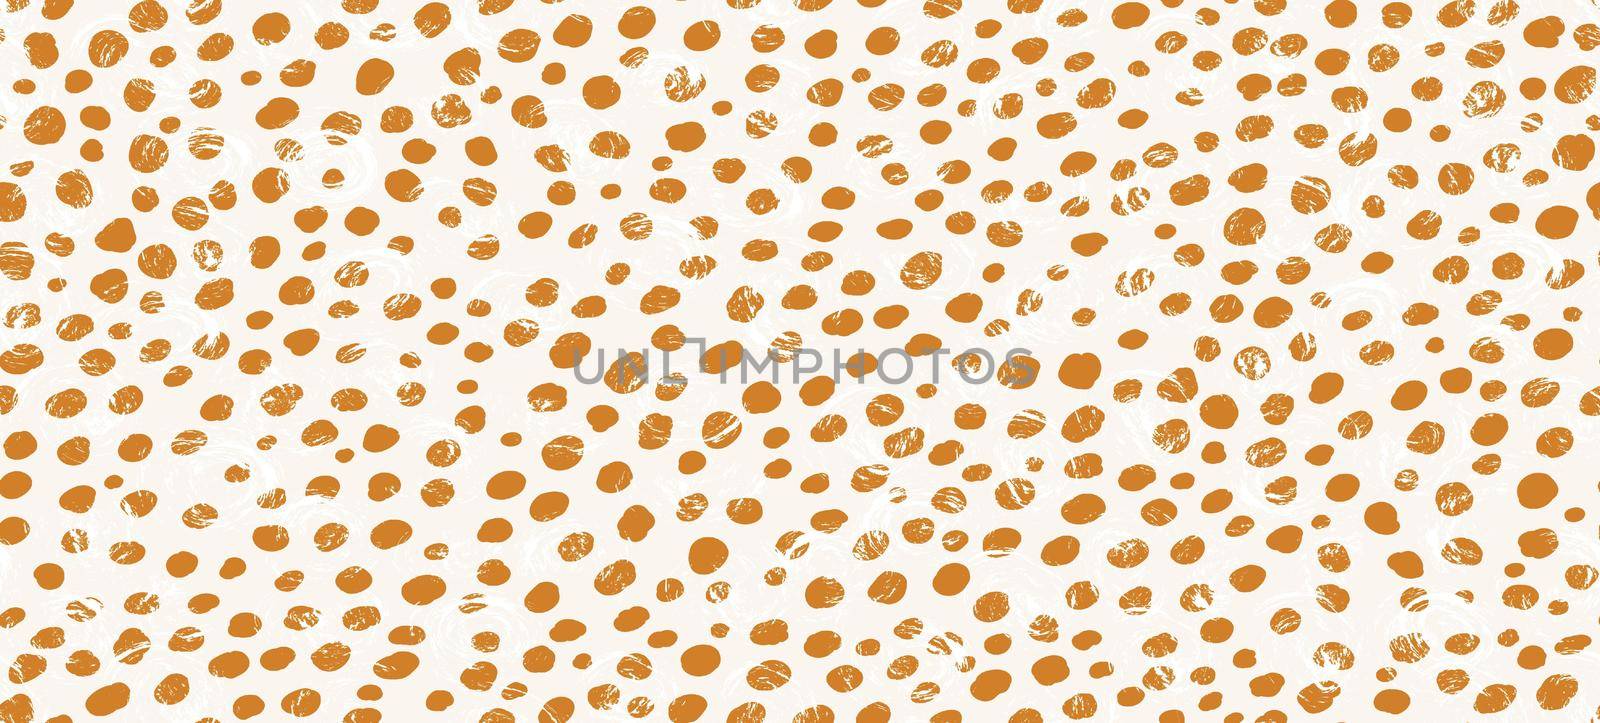 Abstract modern leopard seamless pattern. Animals trendy background. Brown and white decorative vector stock illustration for print, card, postcard, fabric, textile. Modern ornament of stylized skin by allaku